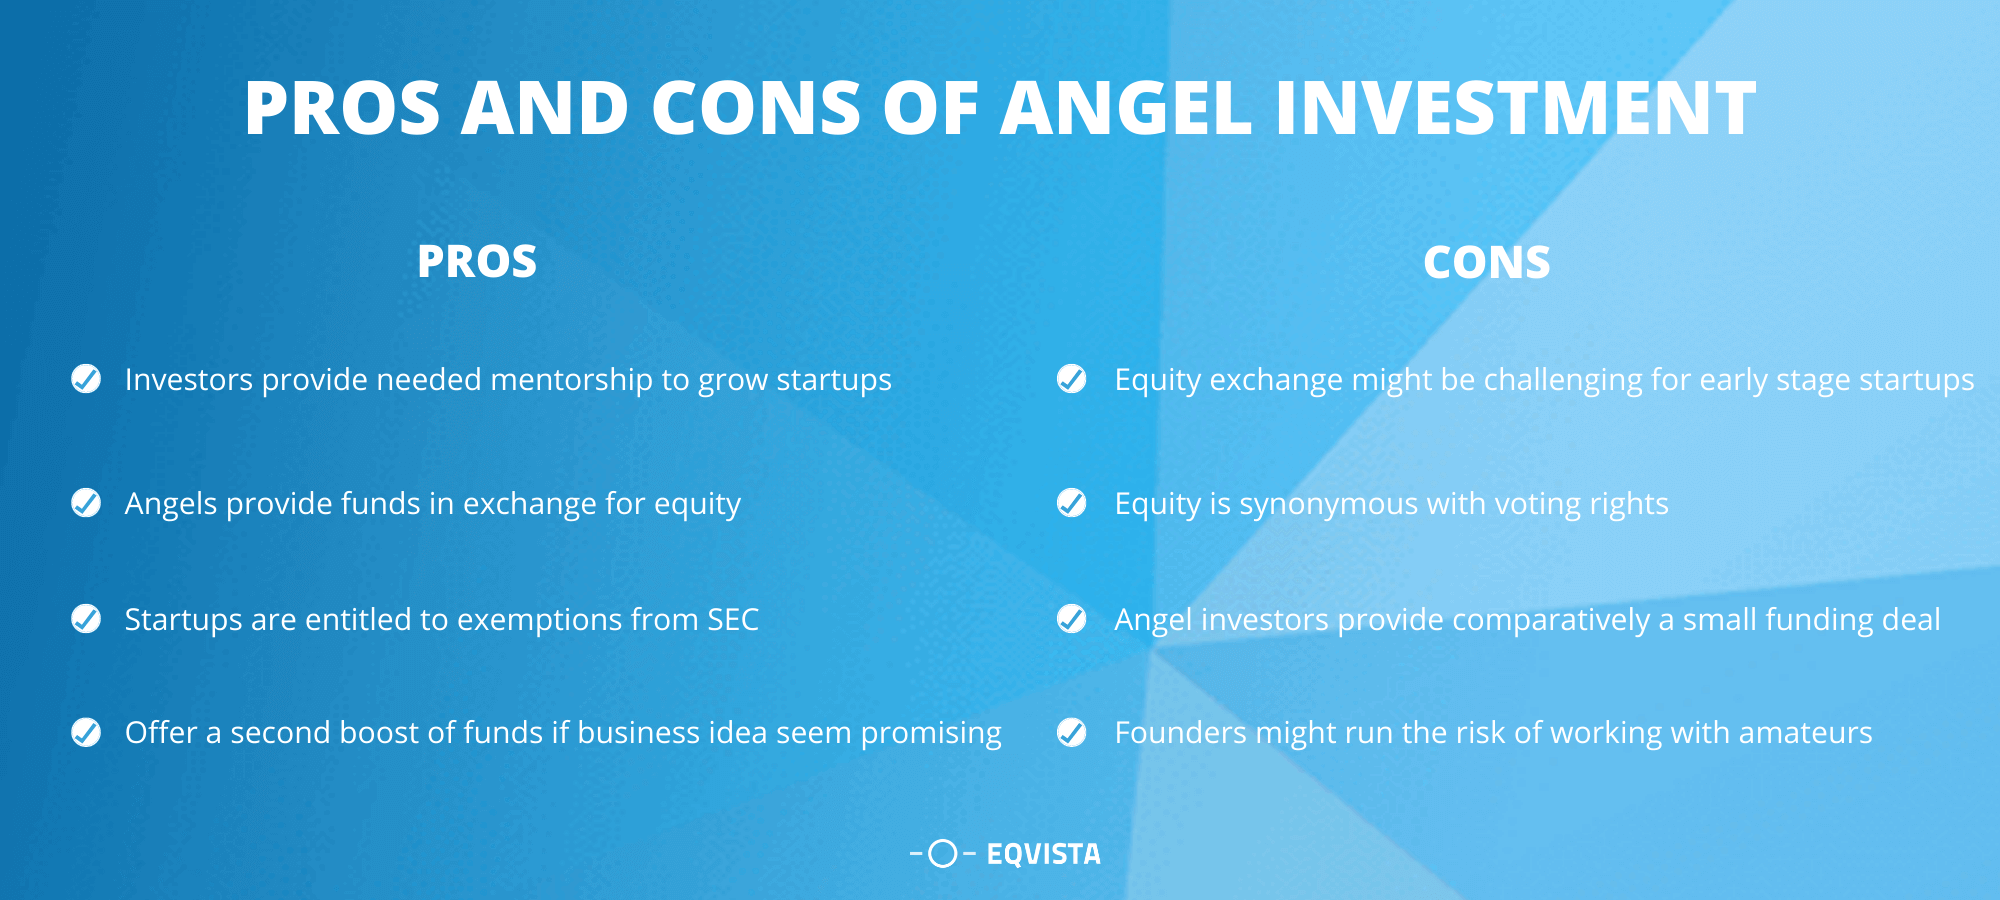 Pros and Cons of Angel Investment